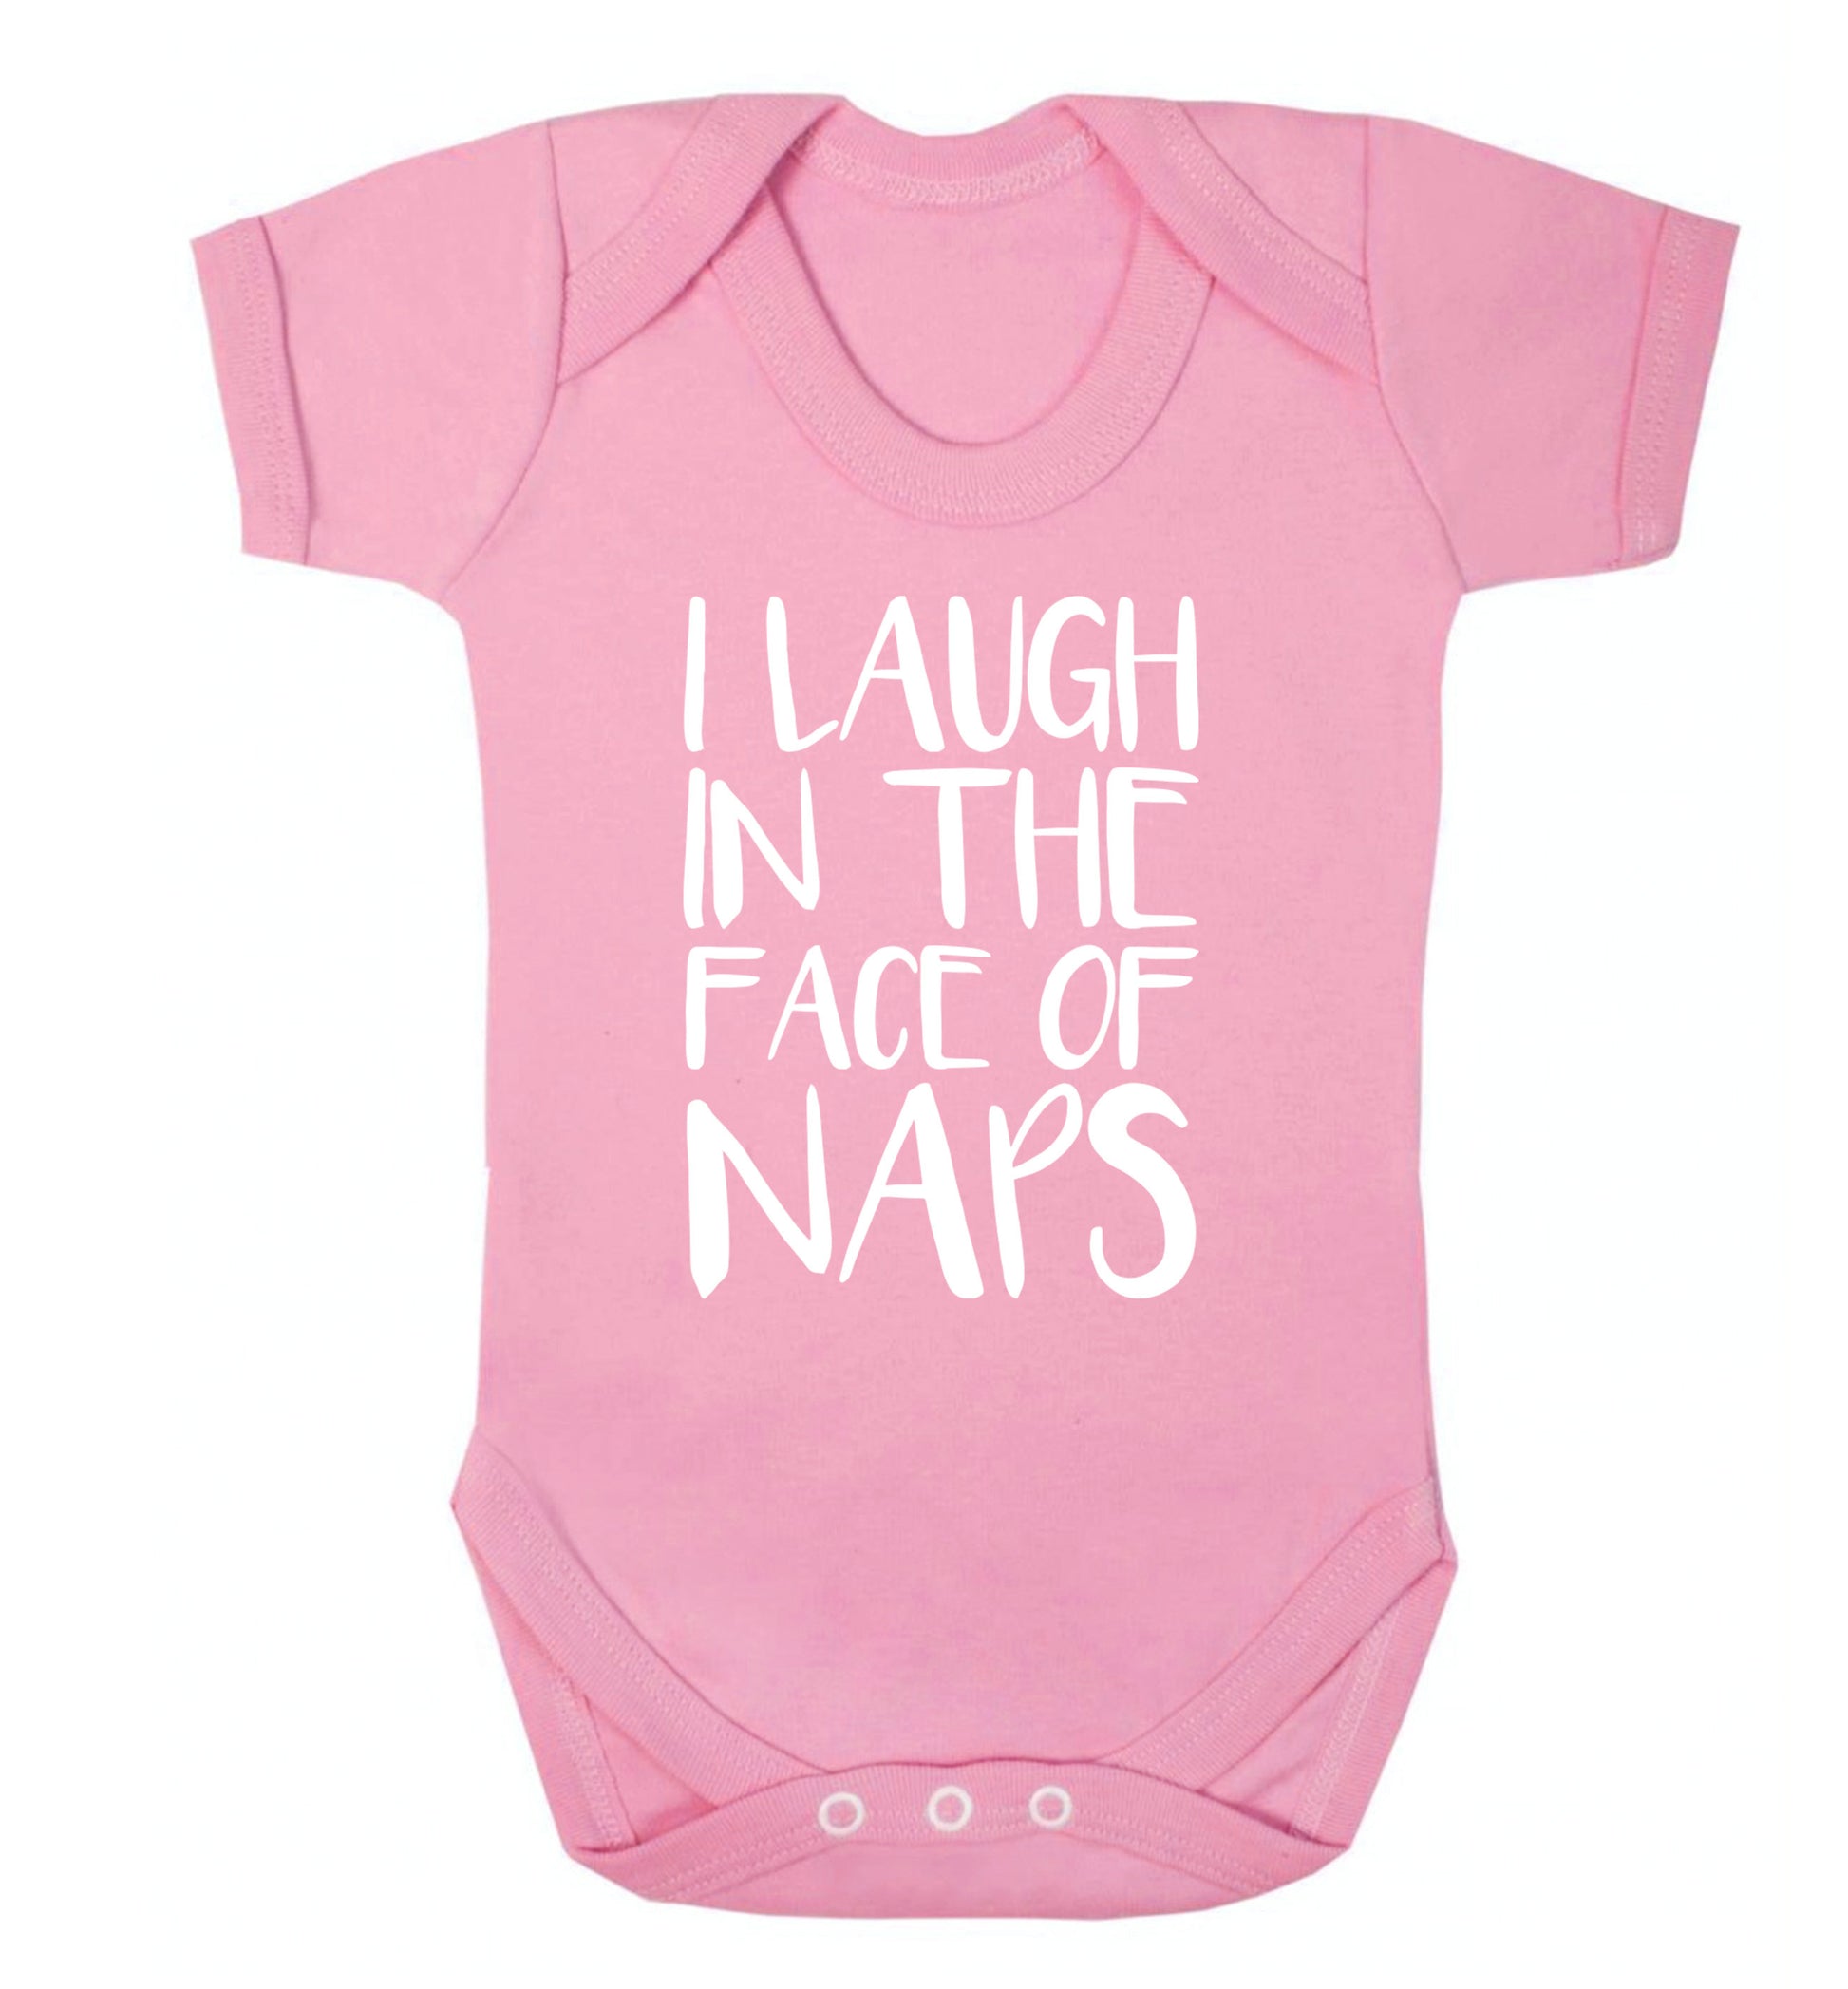 I laugh in the face of naps Baby Vest pale pink 18-24 months